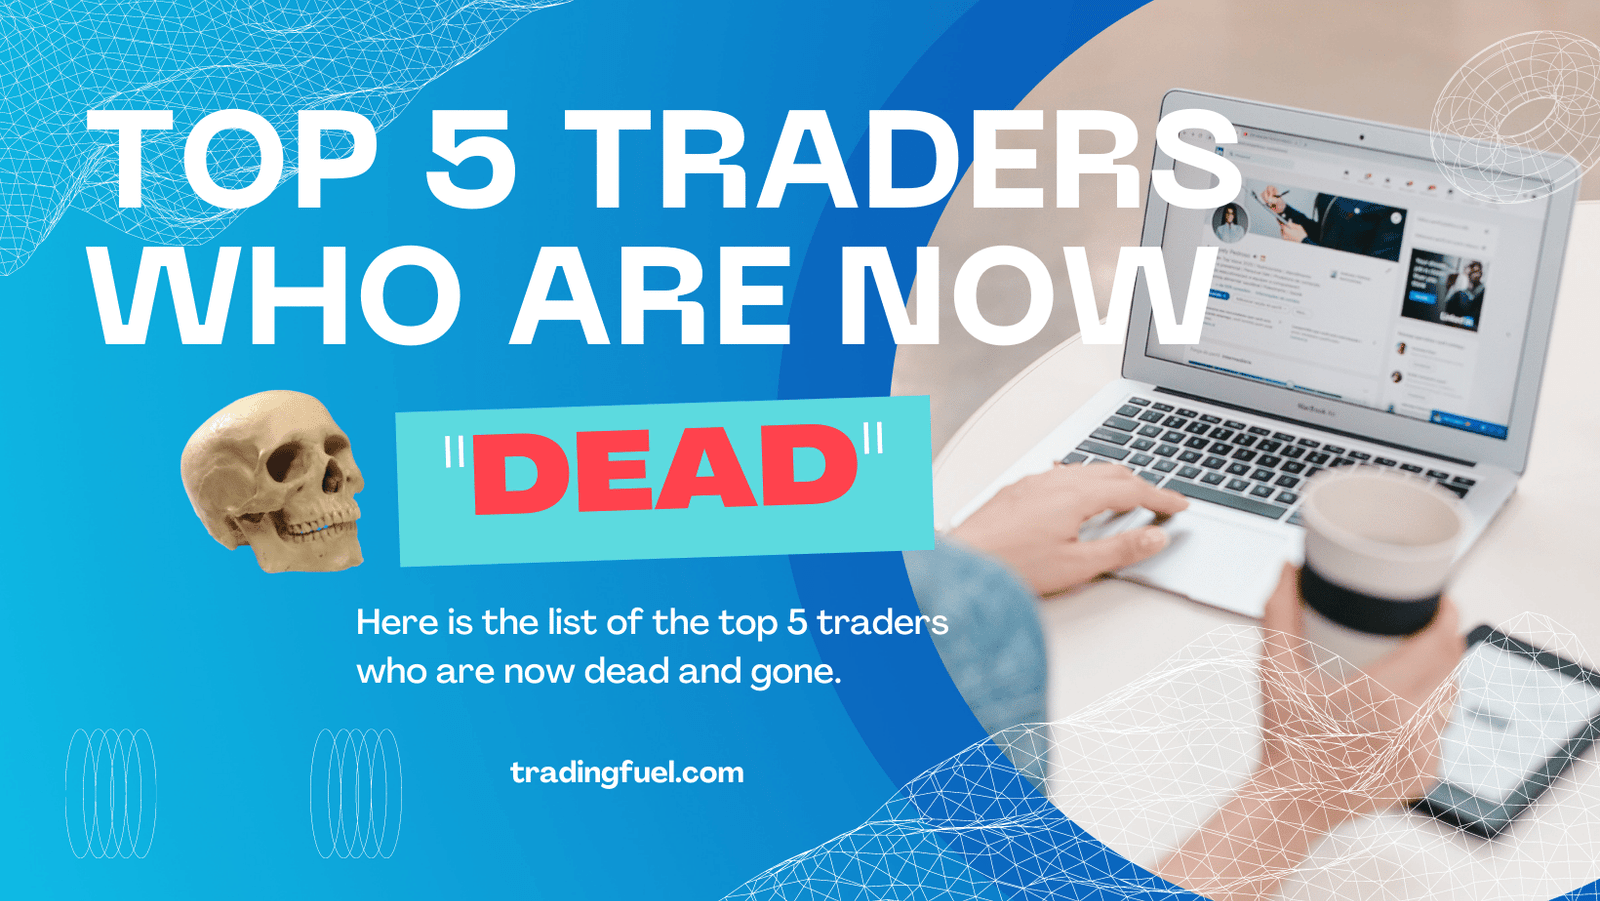 Top 5 Traders who are now & ''DEAD"